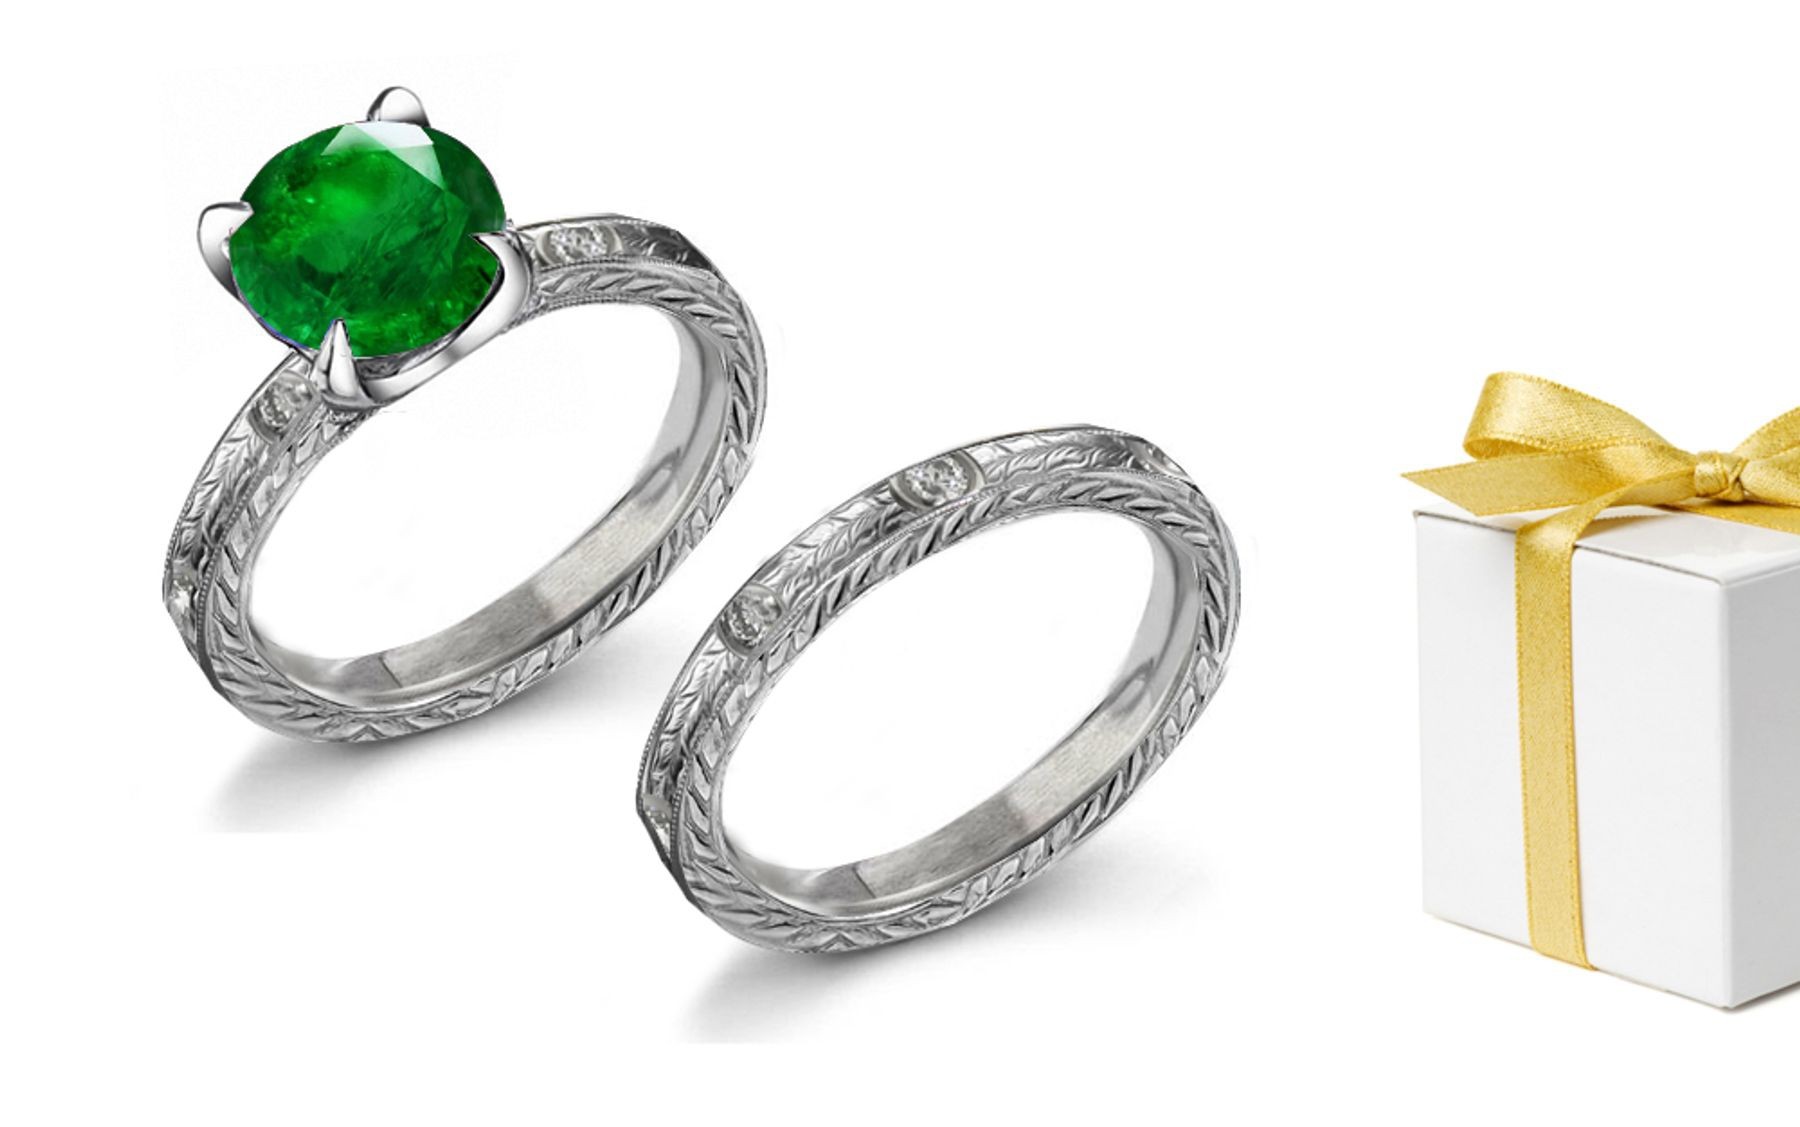 Really Majestic Design: Platinum Victorian Style Exquisite Engraved Emerald & Diamond Ring & Wedding Band 14k 18k Gold